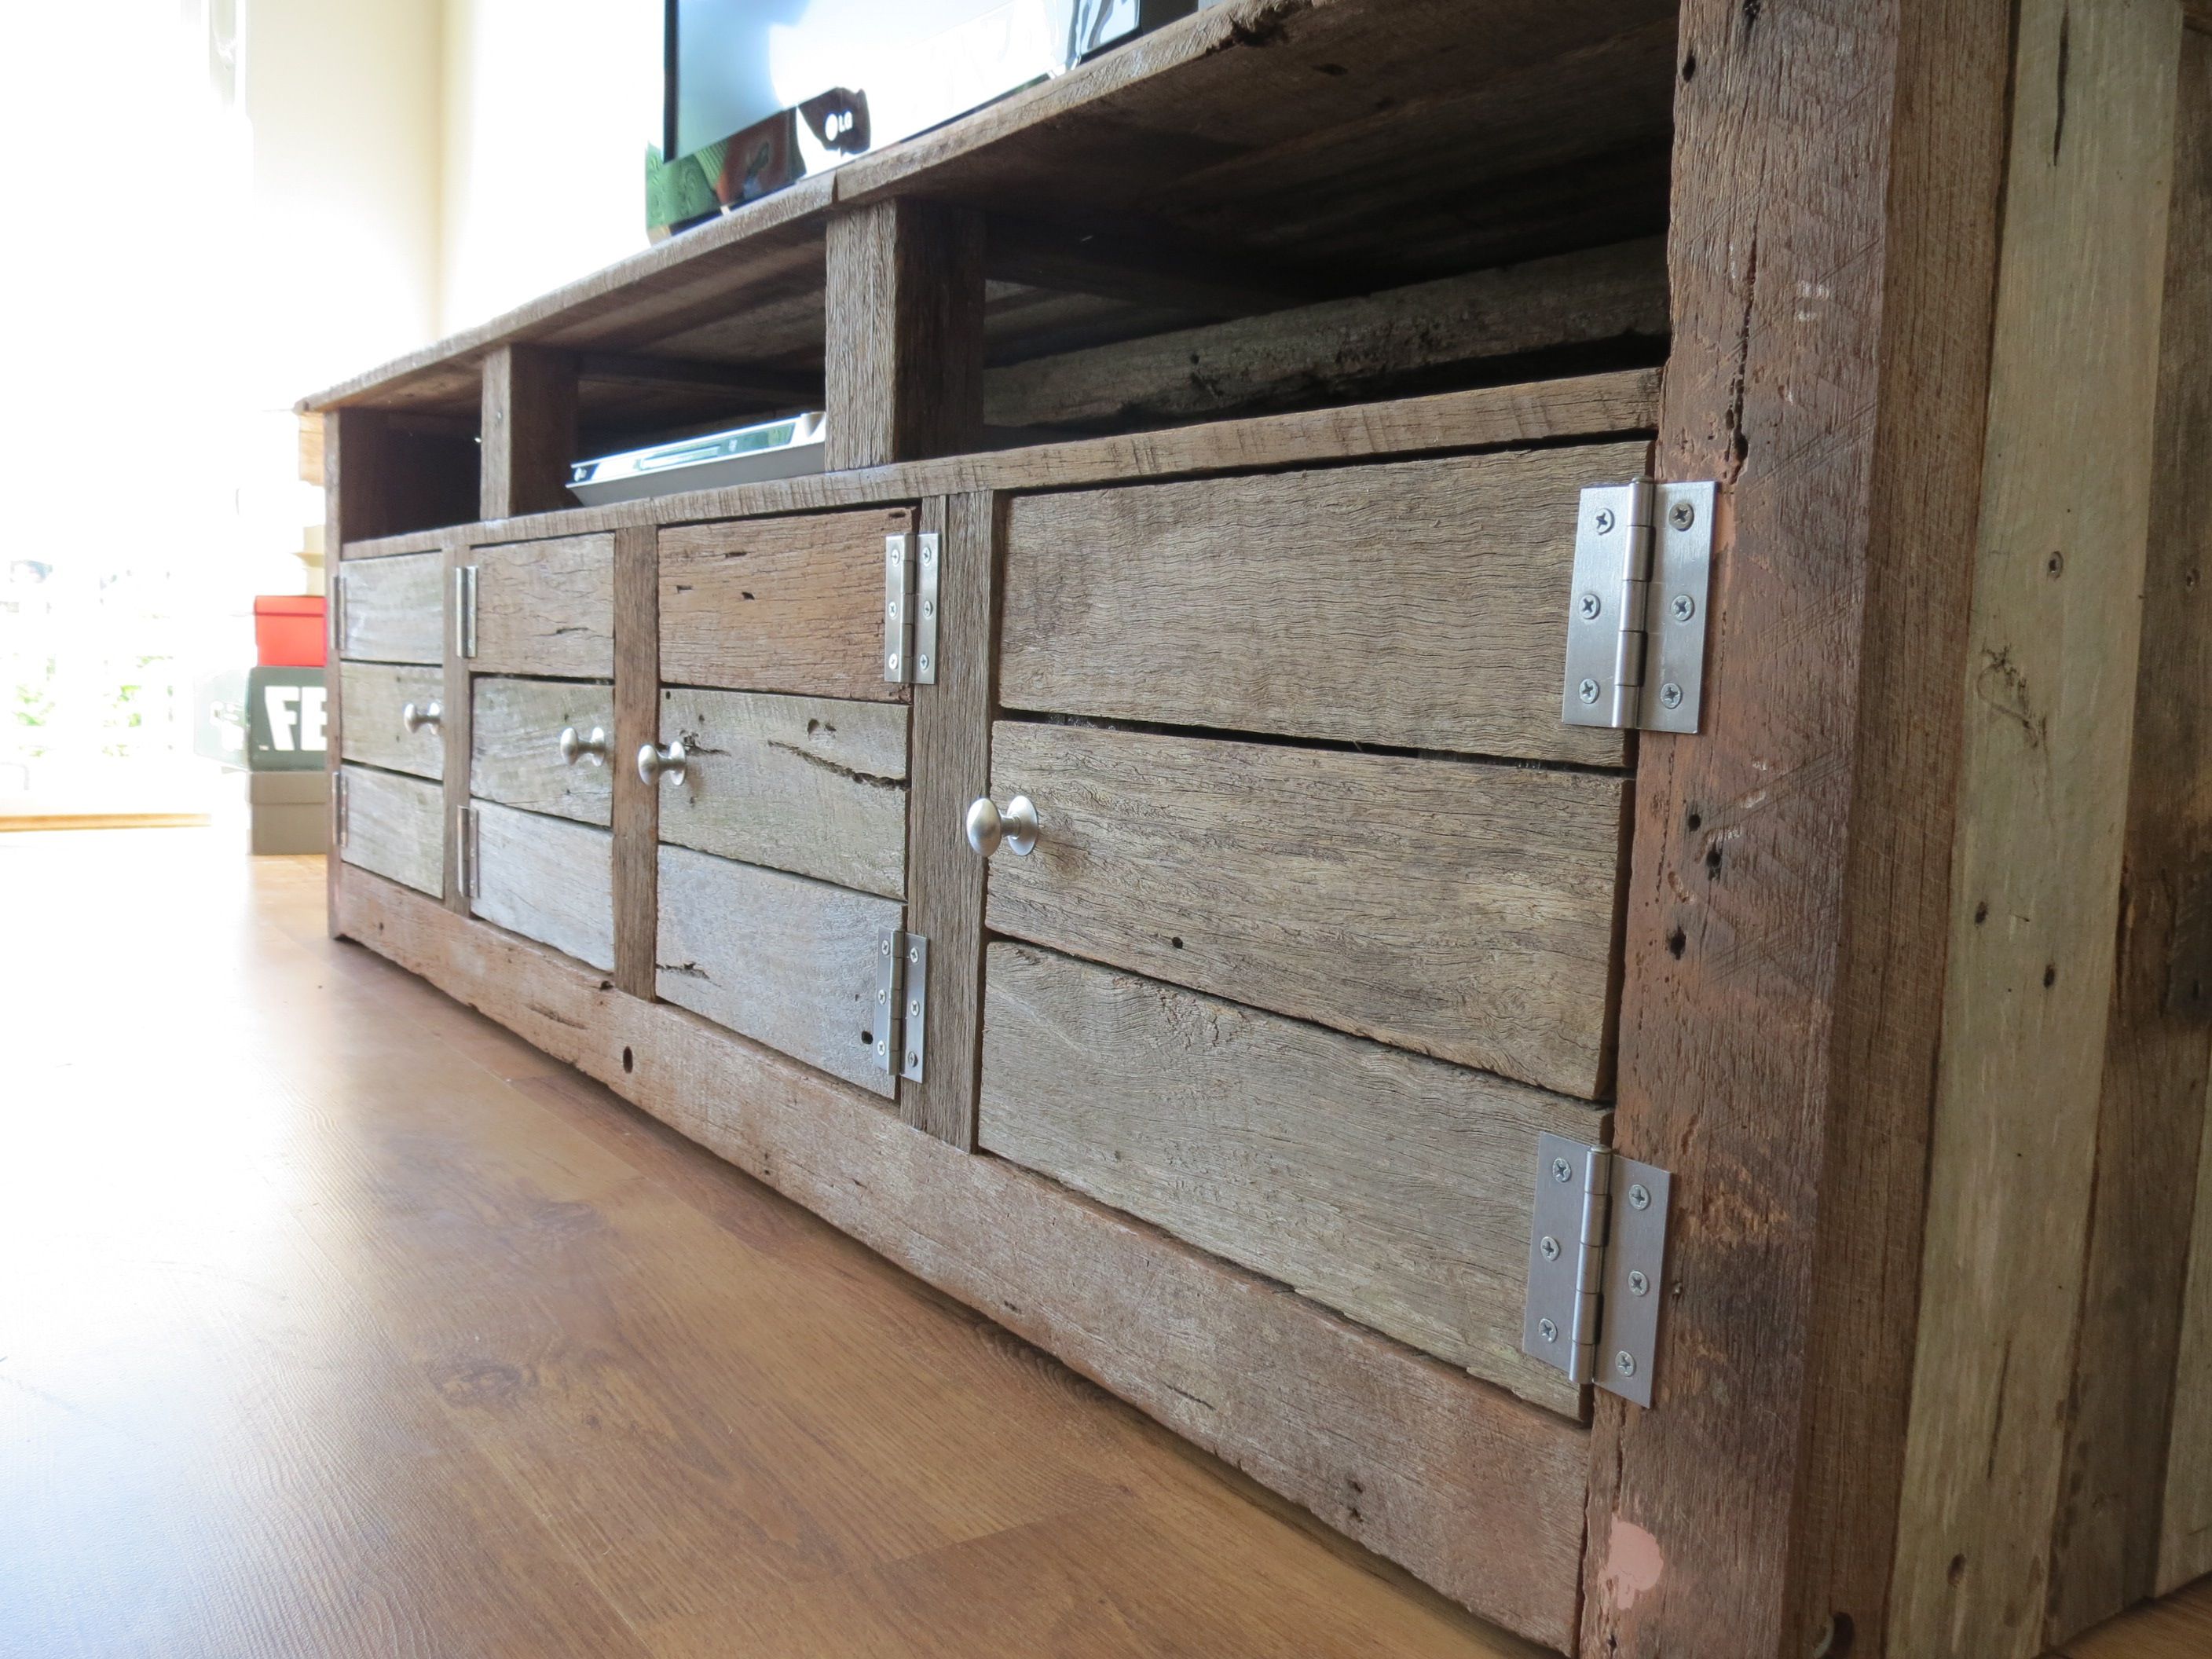 Low line TV unit made from recycled timber | Pailing Ideas ...